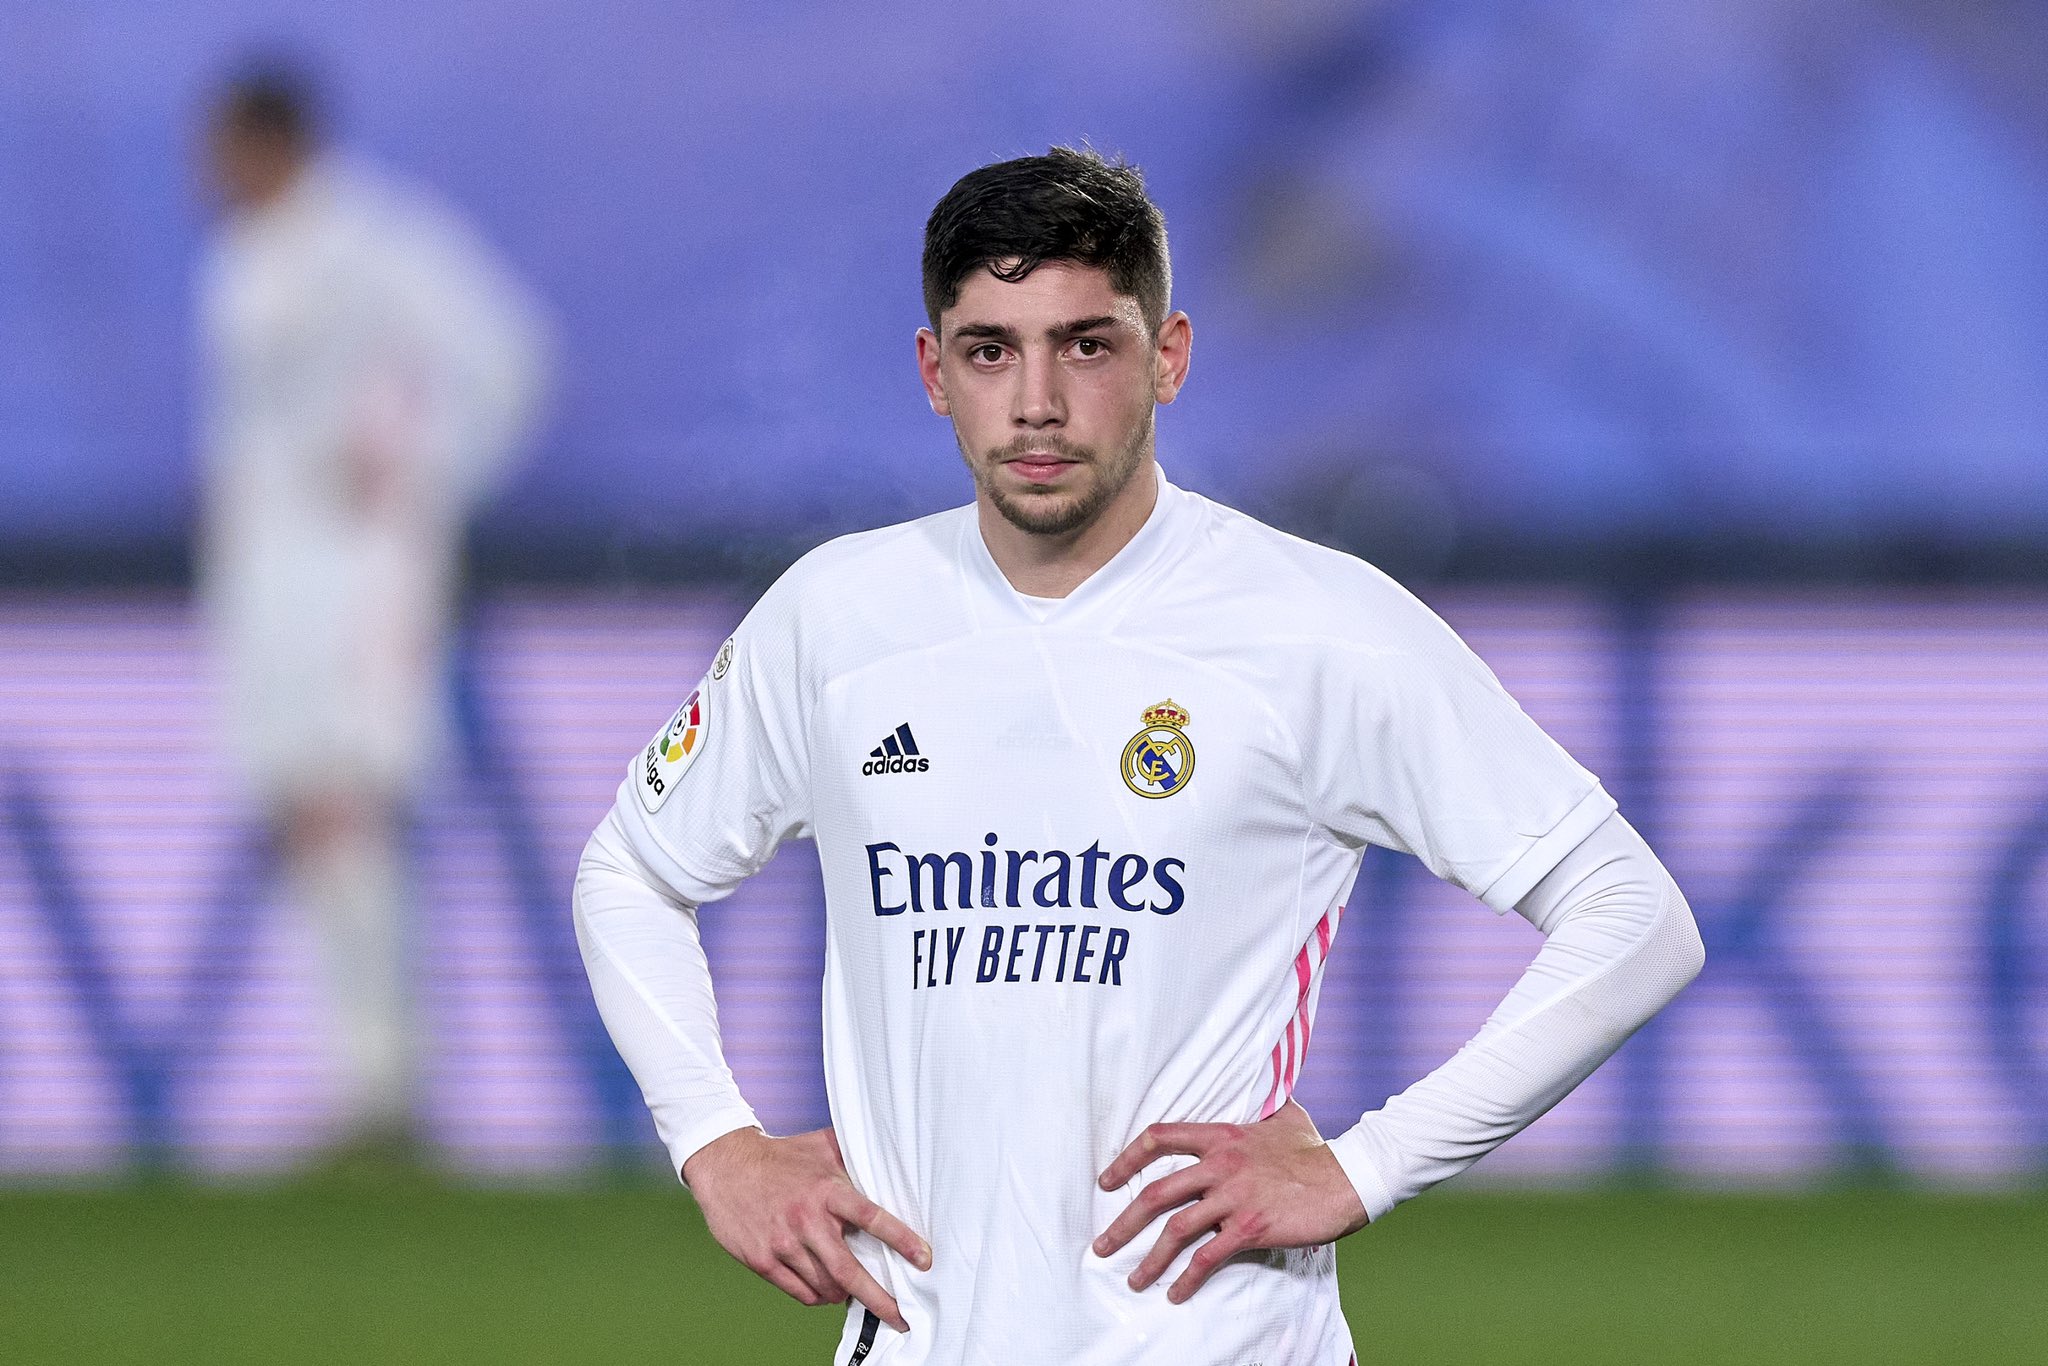 Fabrizio Romano on Twitter: "Excl. Real Madrid are working to extend Fede Valverde's contract, agreement close be completed as Real consider him one of the 'untouchable' players present and future.